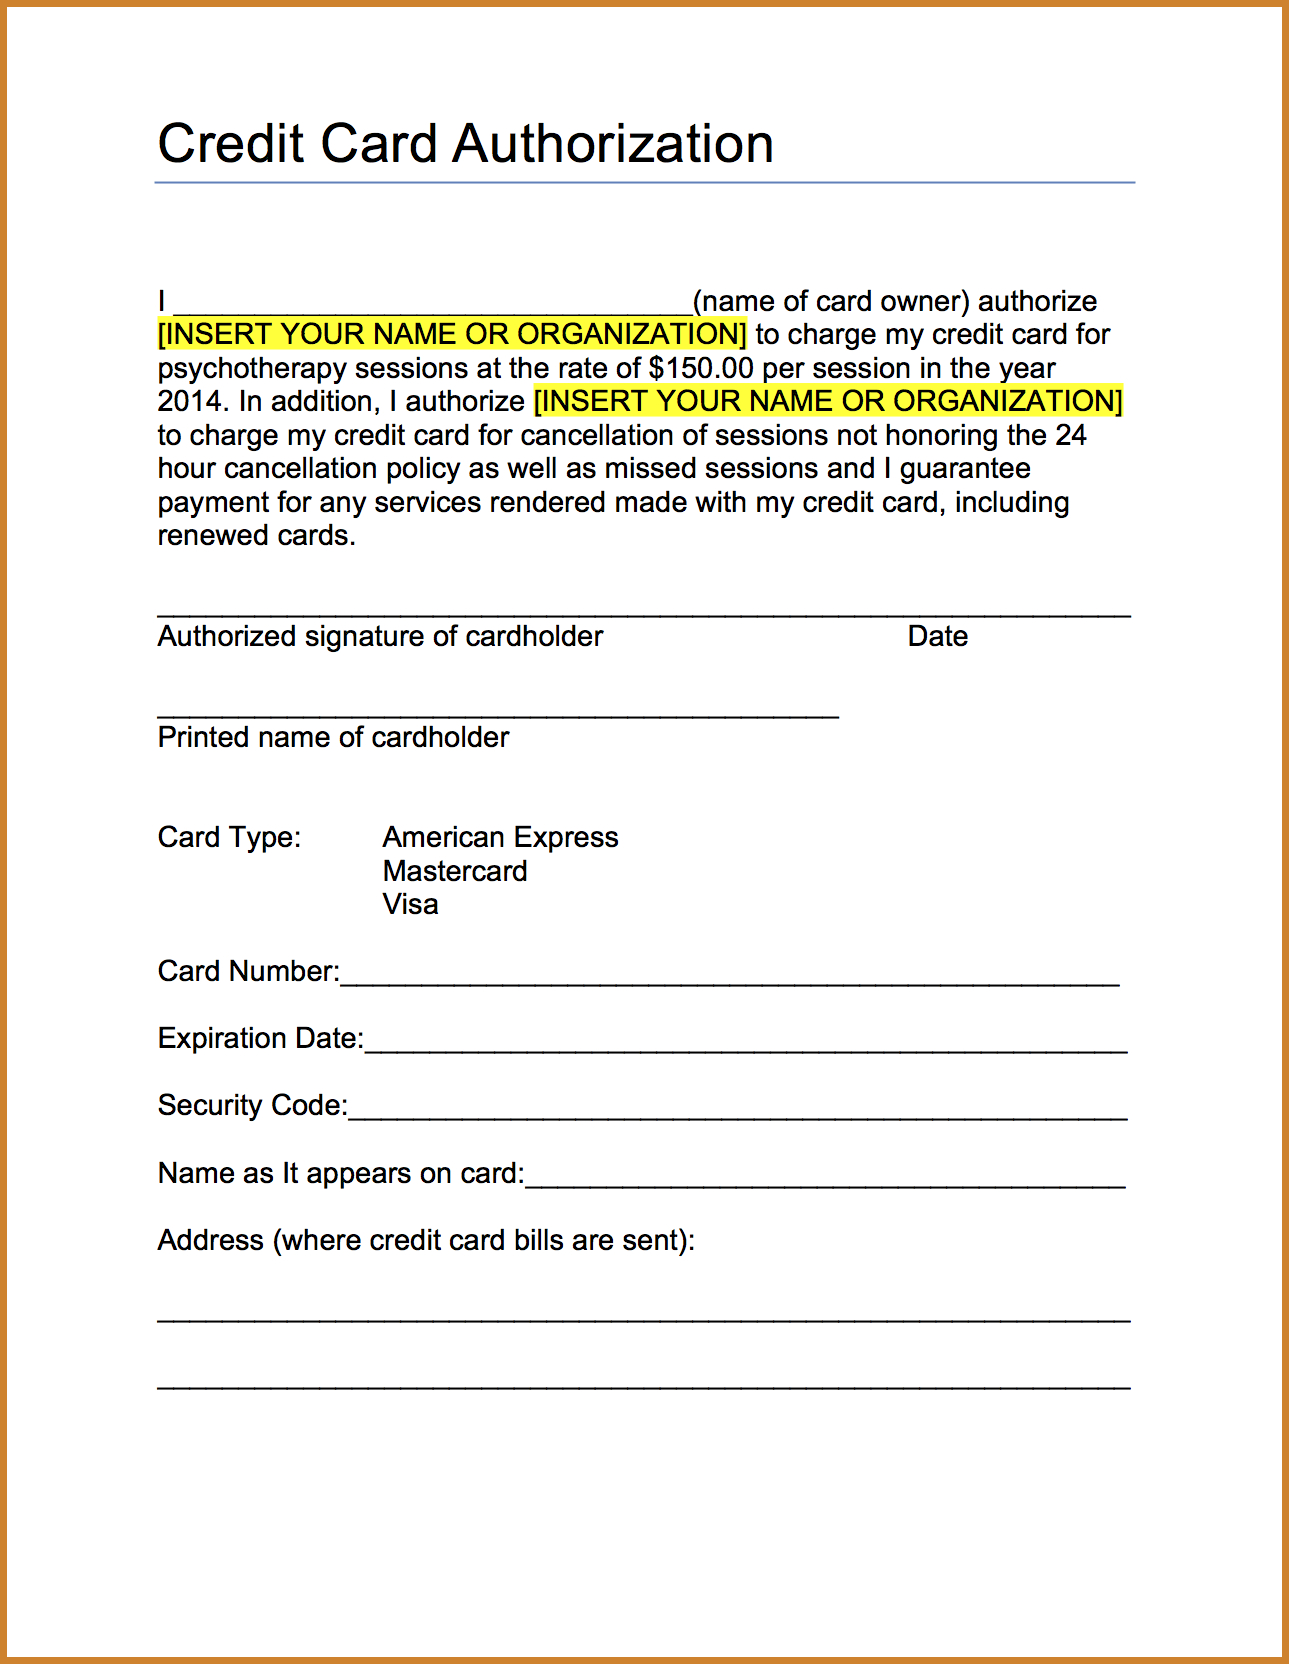 Credit Card Authorization Form Template 41 Jet Airways Regarding Credit Card Authorization Form Template Word